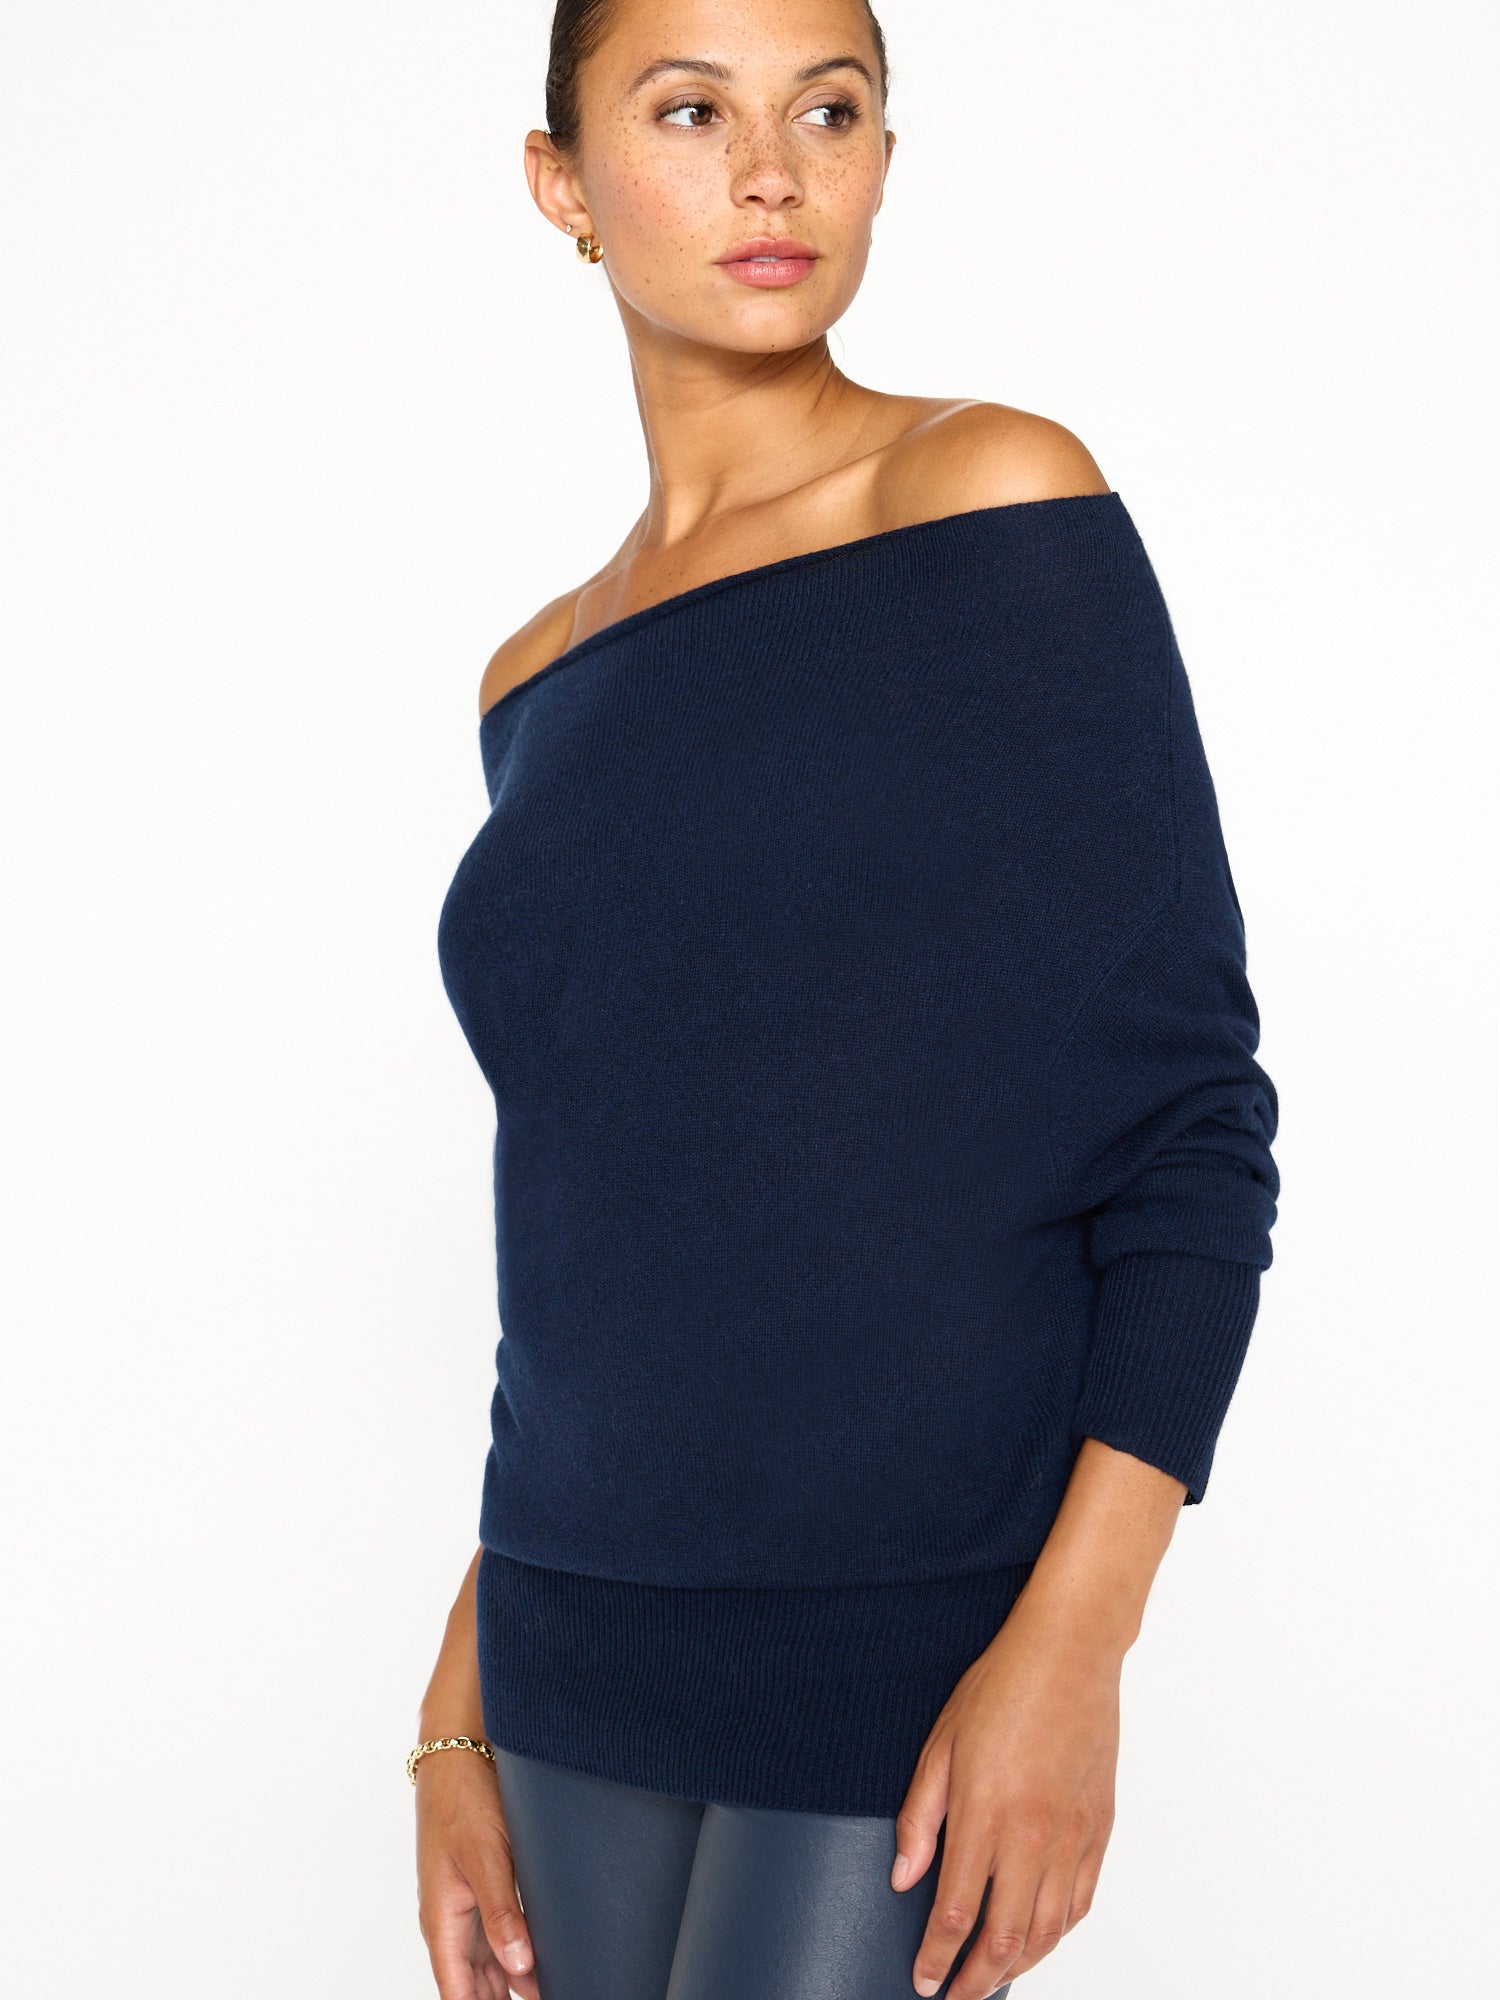 Lori cashmere off shoulder navy sweater side view